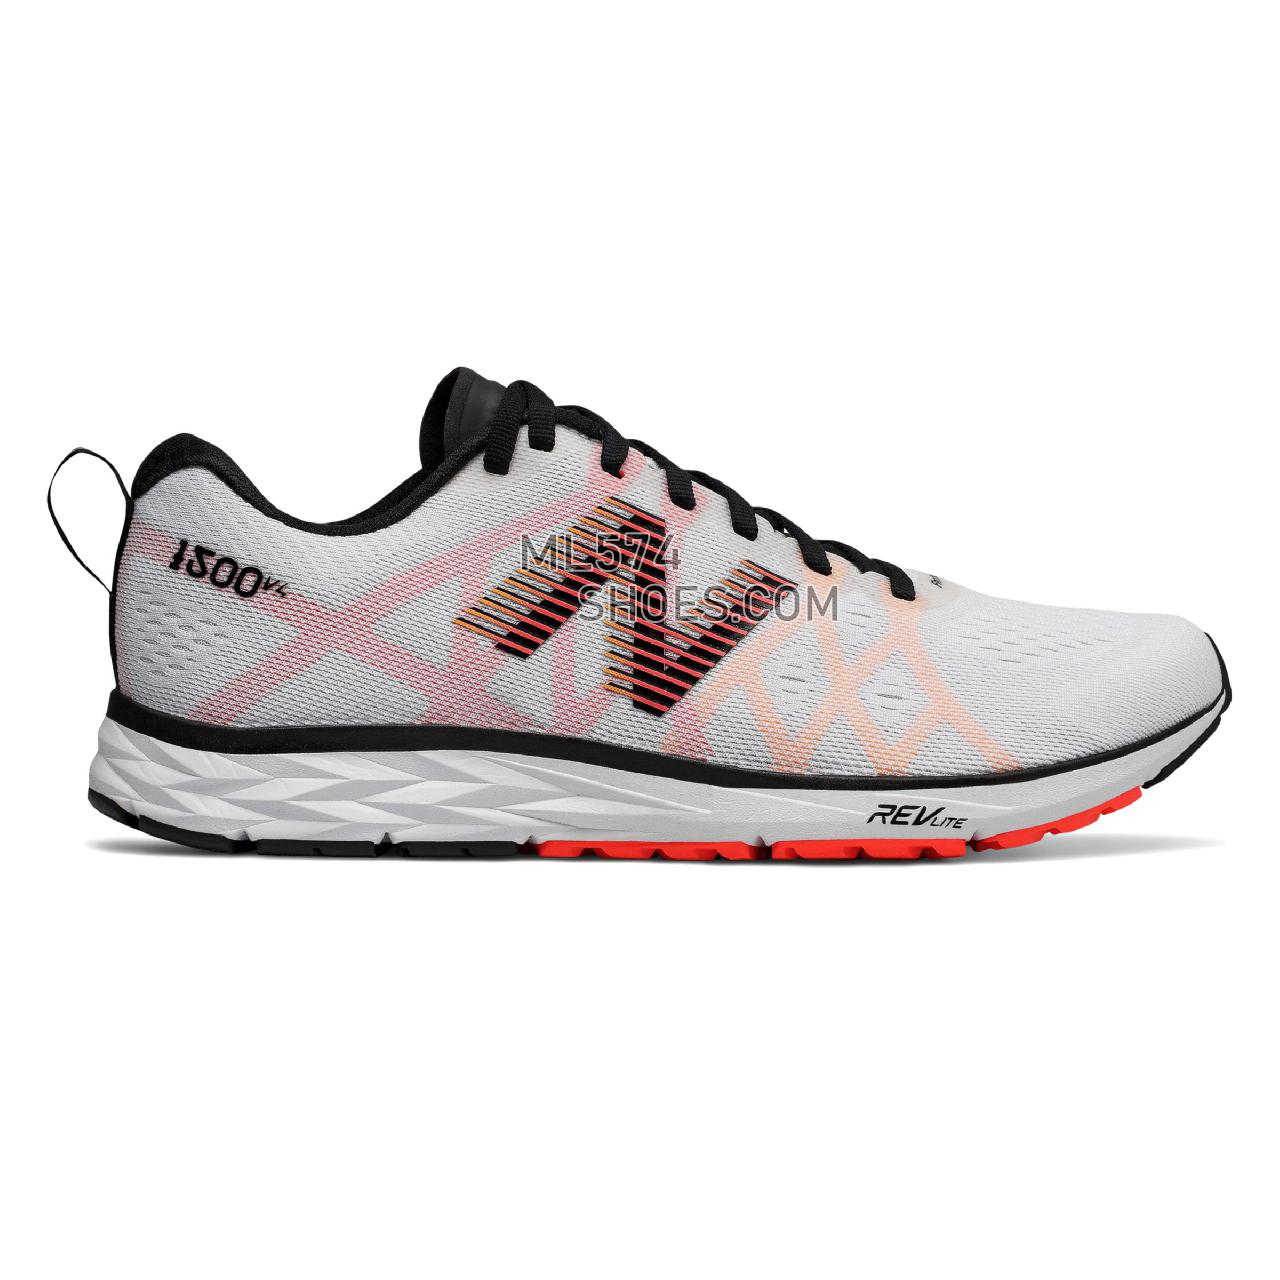 New Balance 1500v4 - Men's 1500 - Running White with Flame and Black - M1500WR4